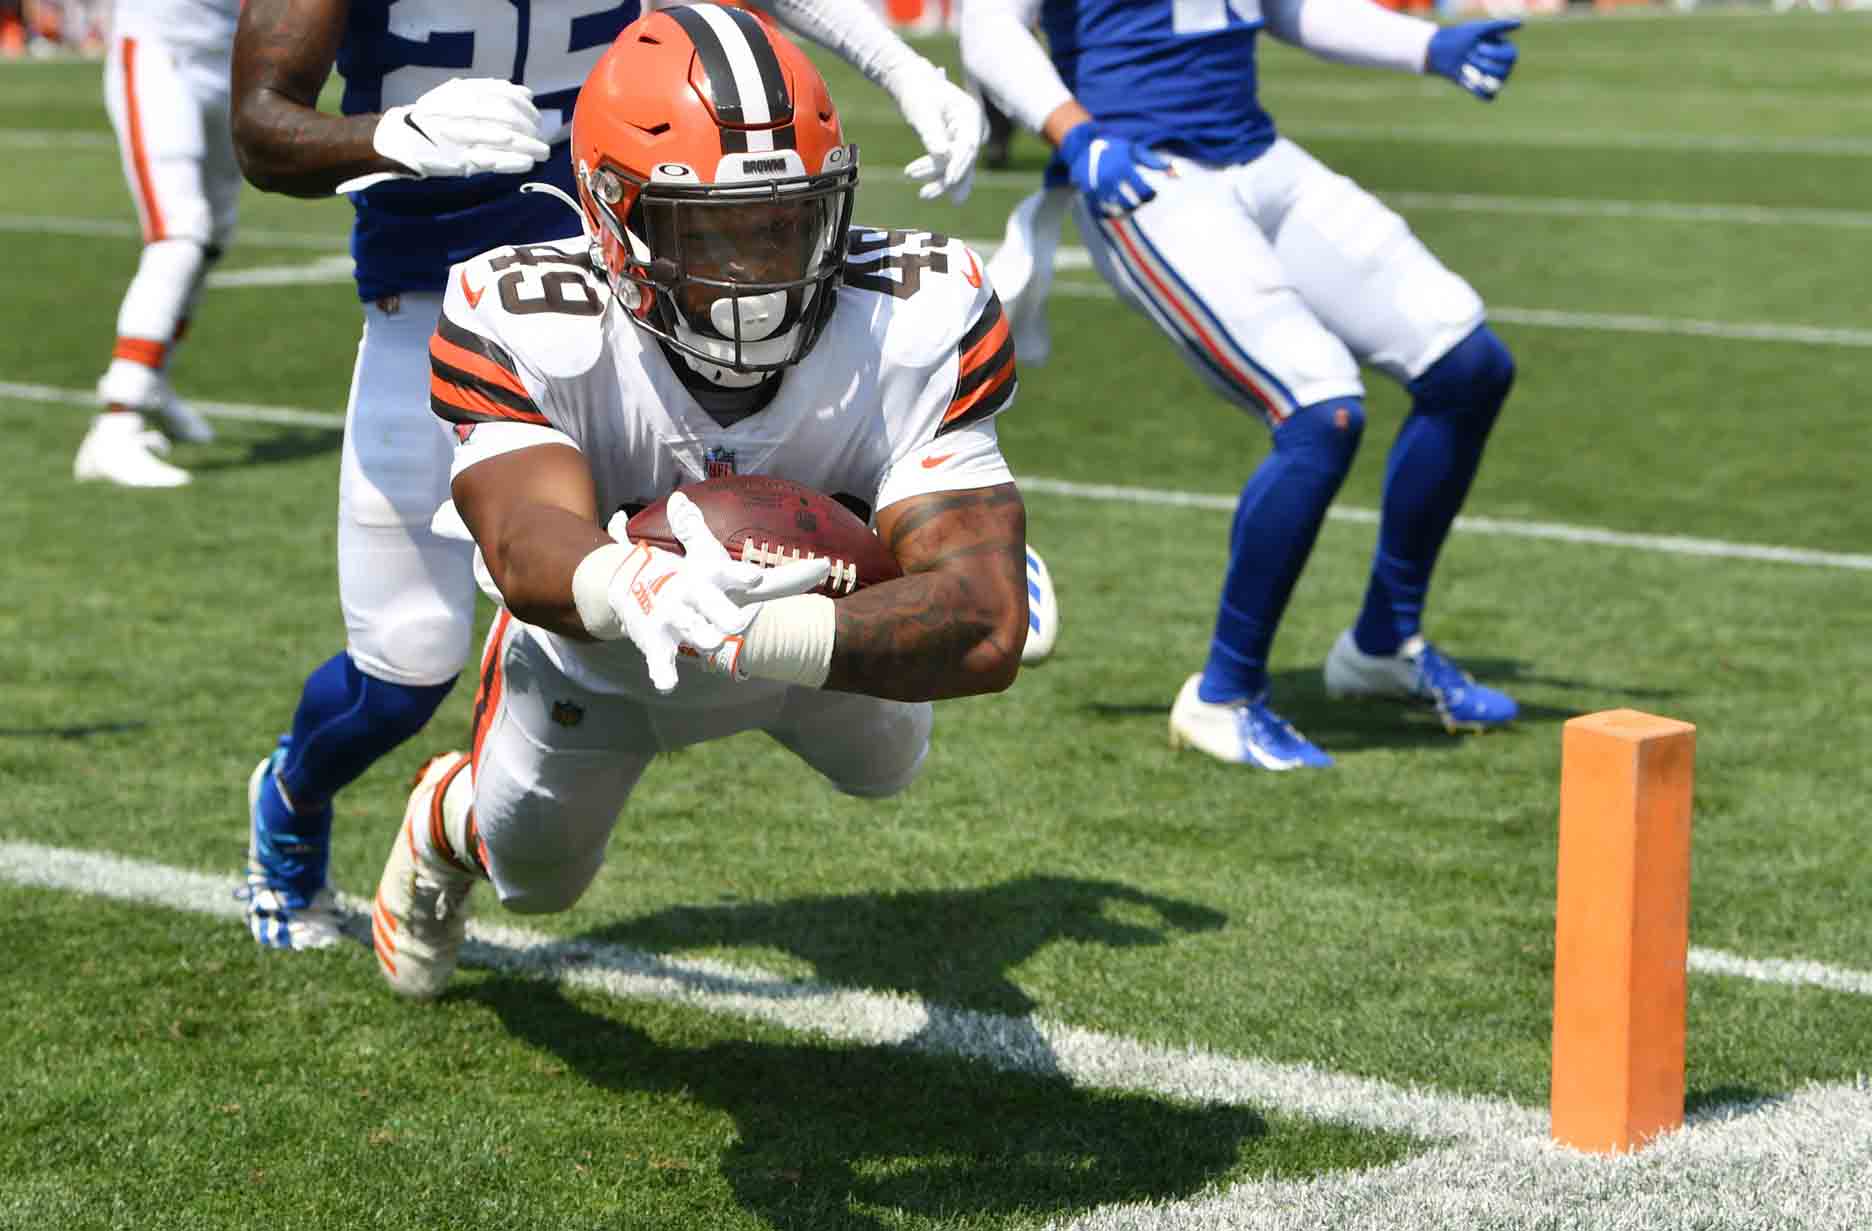 Cleveland Browns running back John Kelly (49) scores a touchdown in front of the defense of New York Giants cornerback Rodarius Williams (25) during the second half at FirstEnergy Stadium.